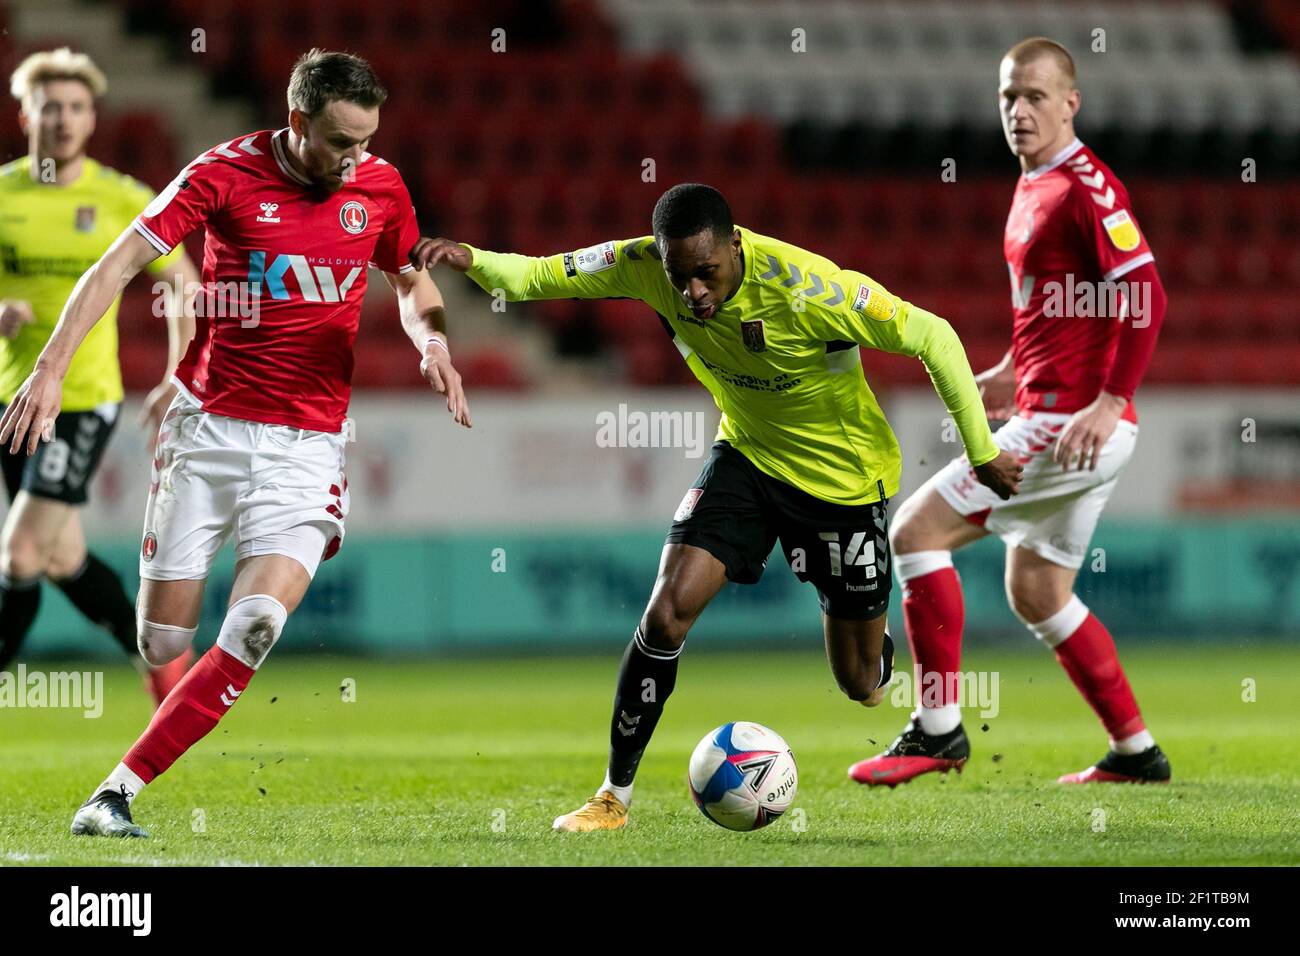 LONDON. UK. MARCH 9TH: Mickel Miller of Northampton Town and Chris Gunter of Charlton compete for the ball during the Sky Bet League 1 match between Charlton Athletic and Northampton Town at The Valley, London on Tuesday 9th March 2021. (Credit: Juan Gasparini | MI News) Credit: MI News & Sport /Alamy Live News Stock Photo